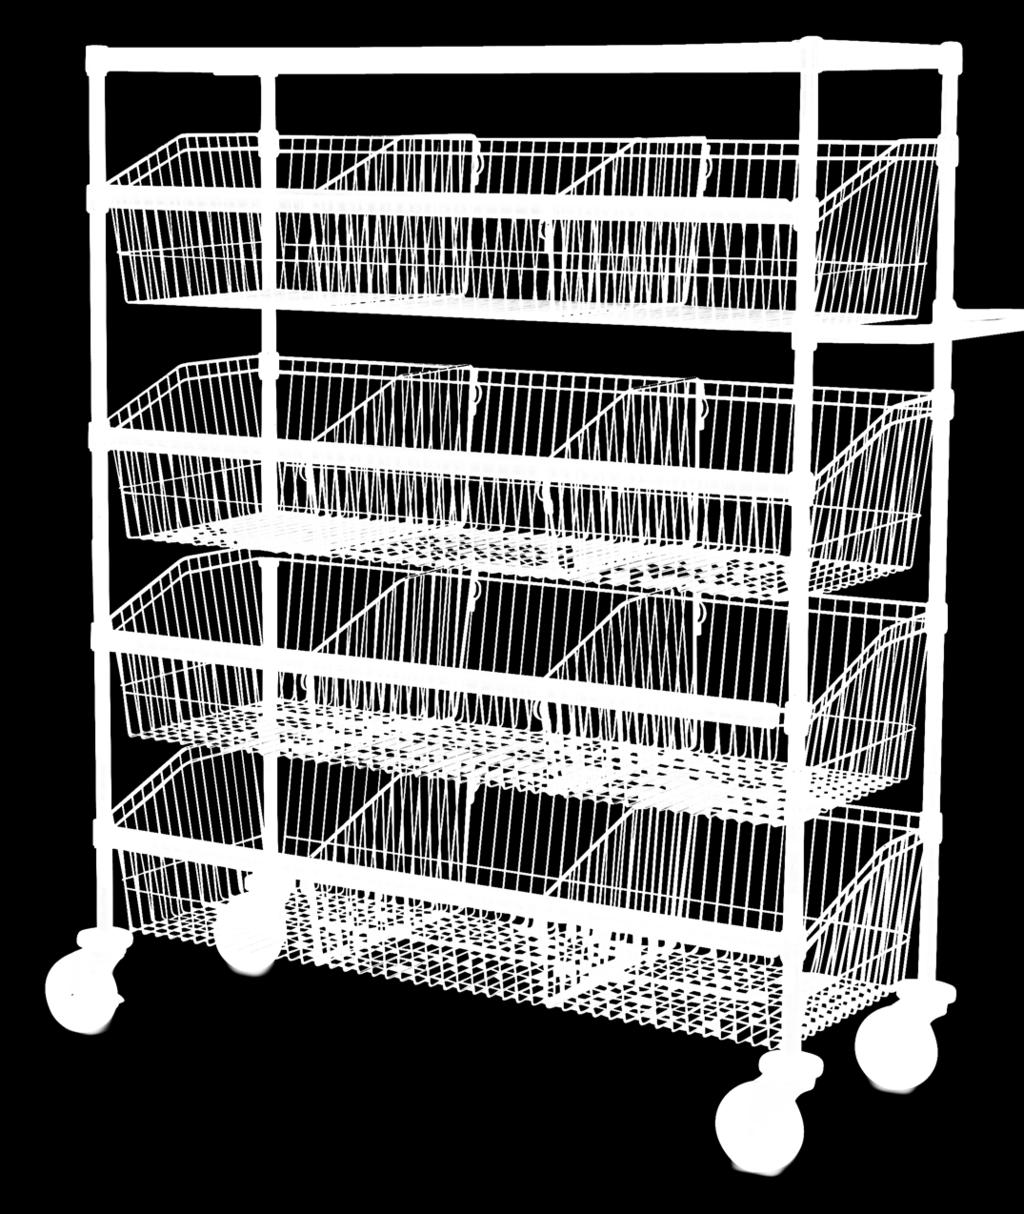 The side screes keep product from fallig off the sides of the cart, while the dividers are available to properly separate the products o the shelves.